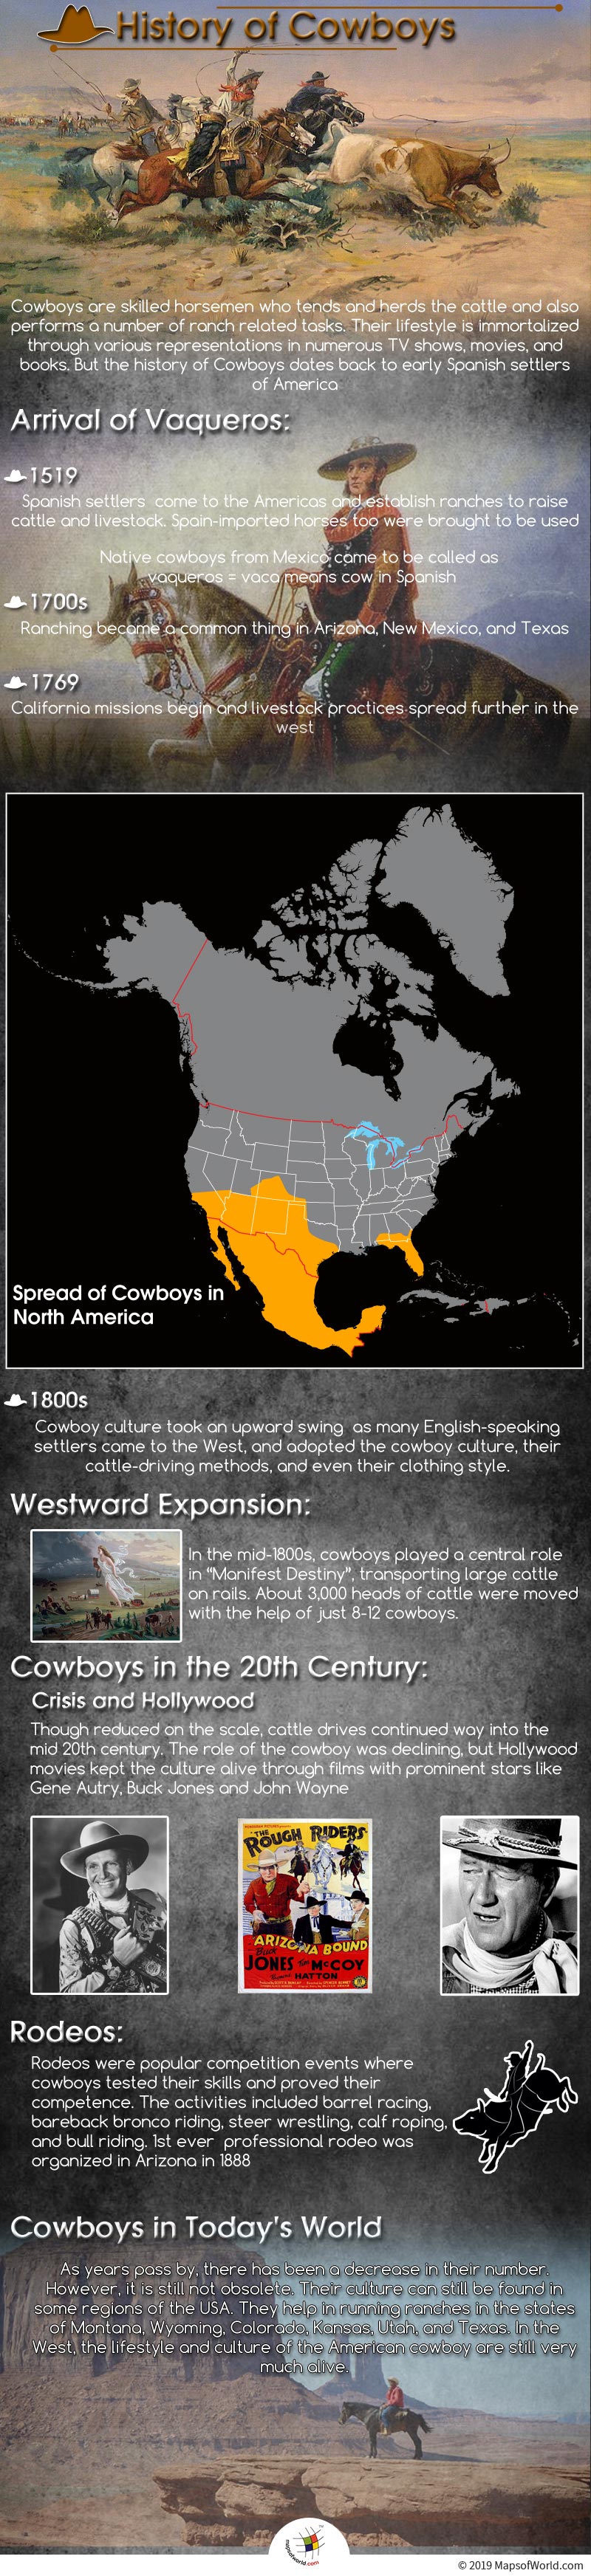 Infographic Shows History of Cowboys